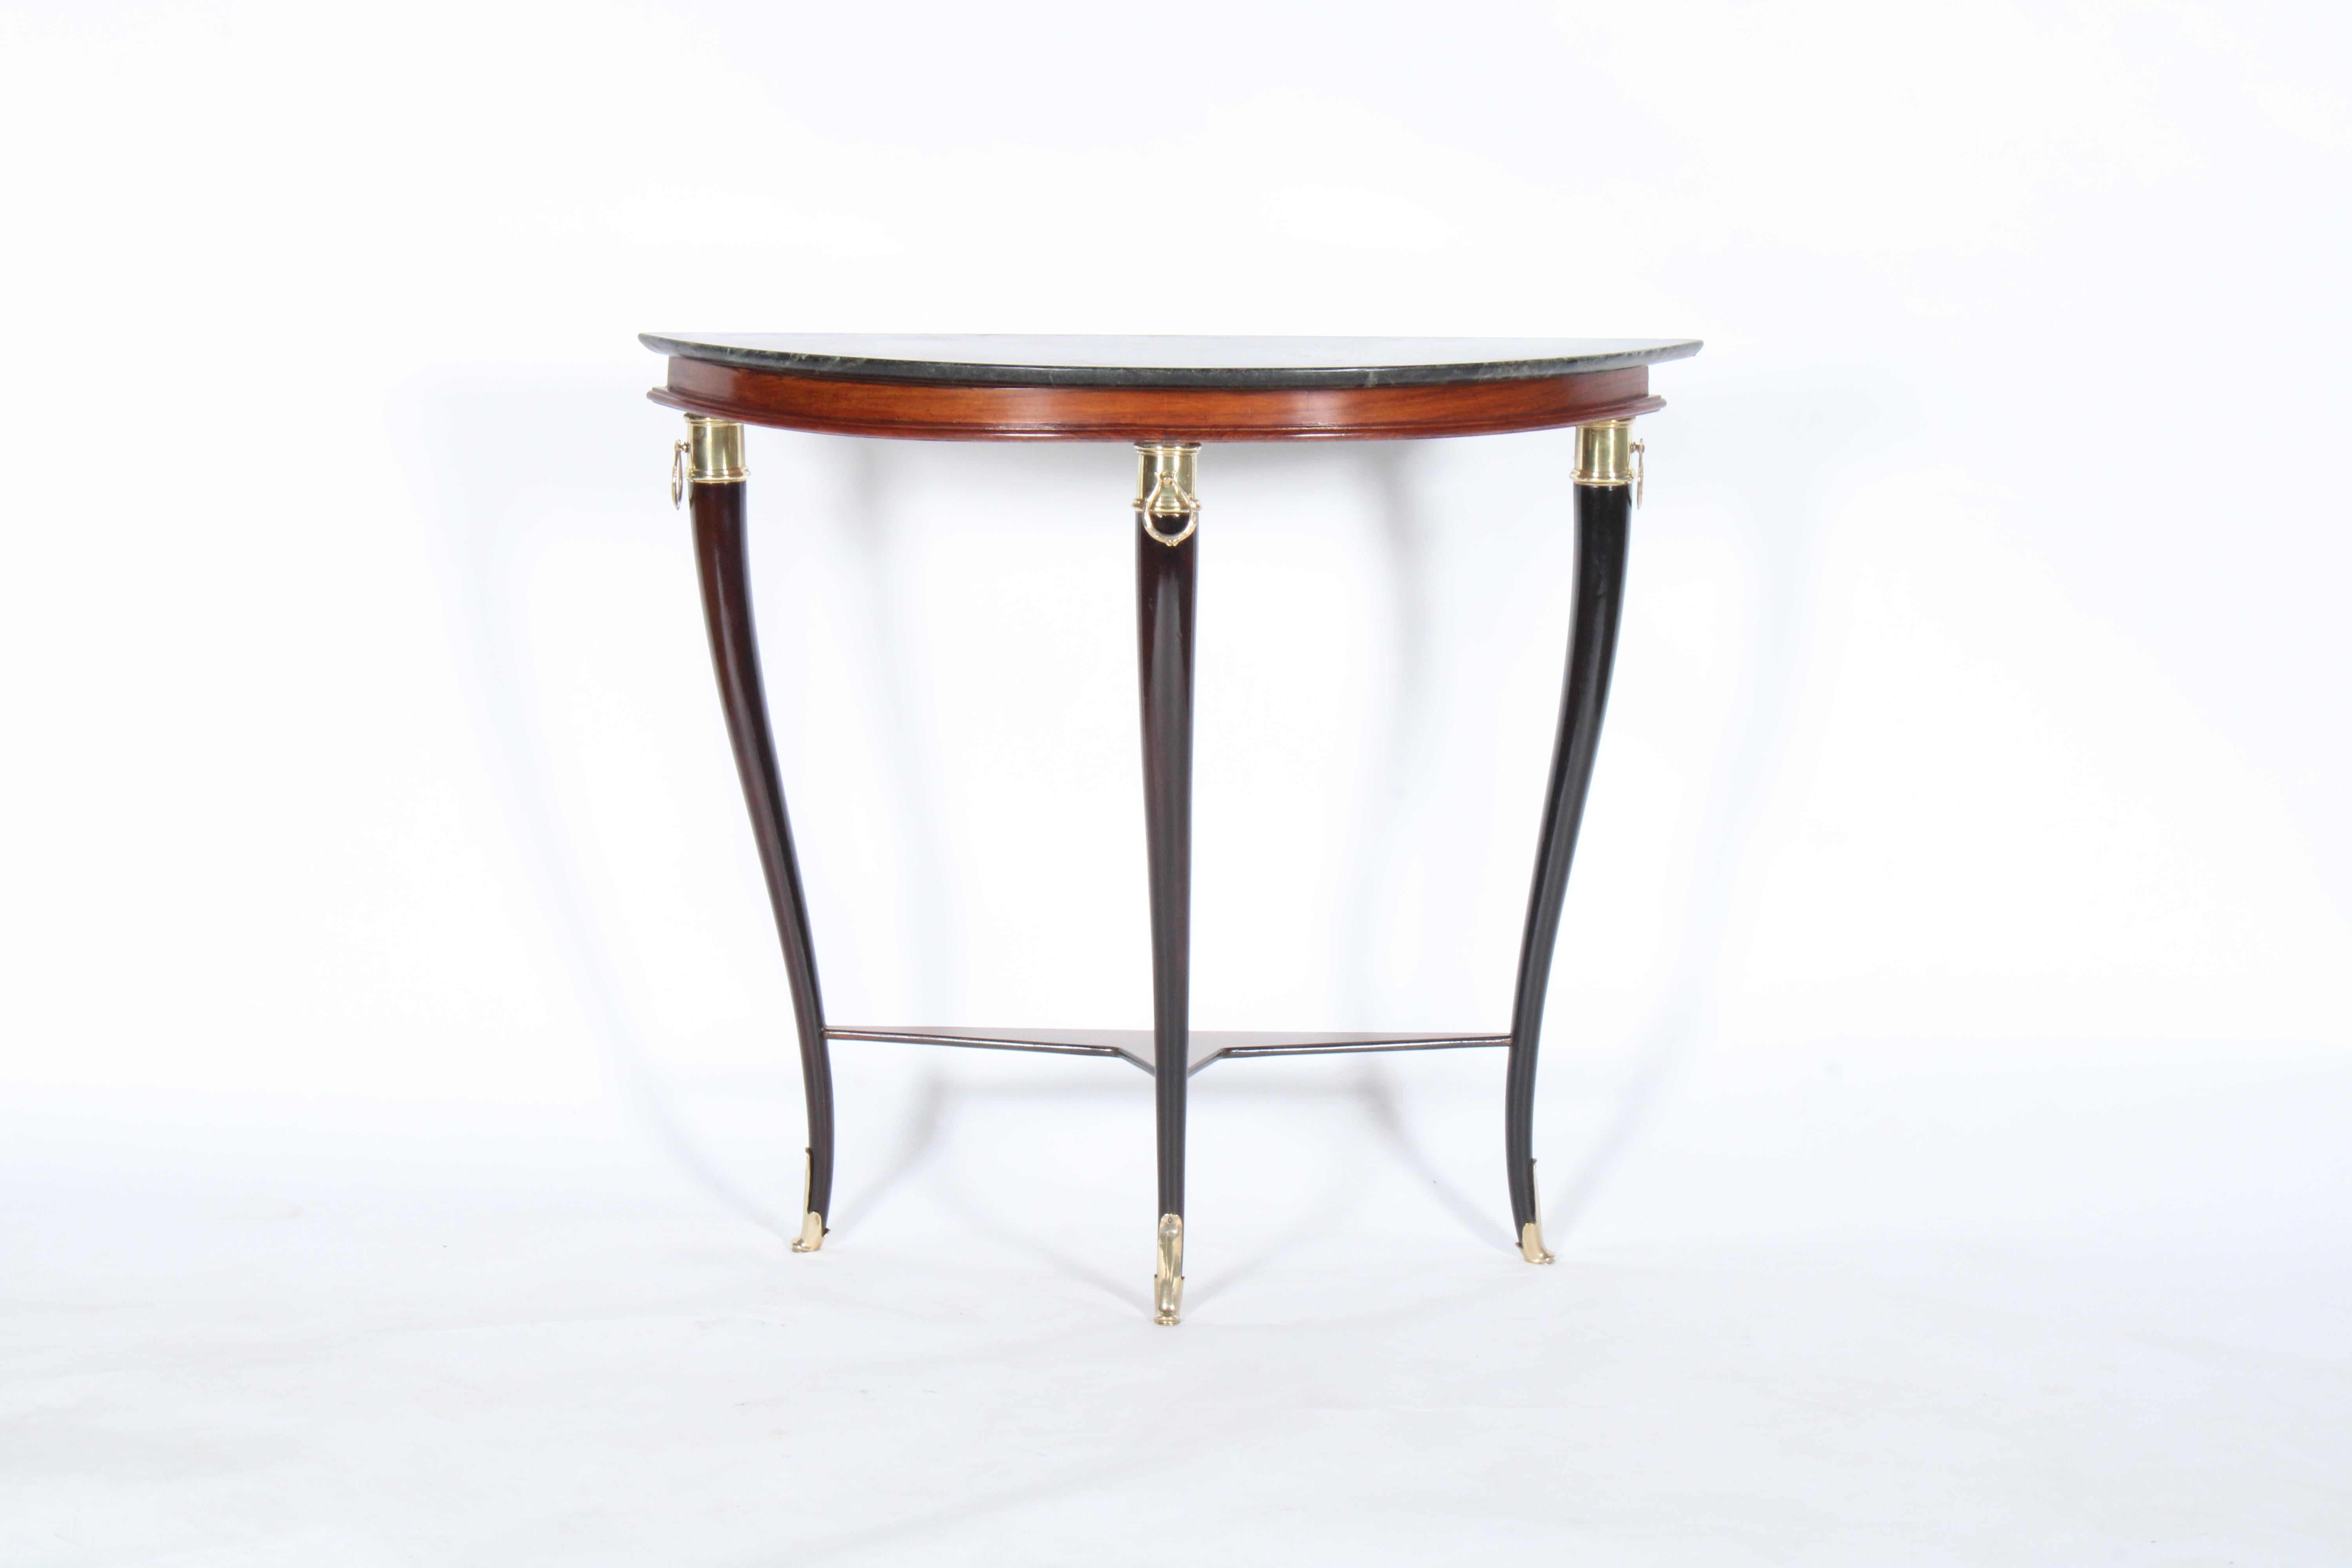 A stunning original mid century Italian console table dating from the 1950's in the style of Paola Buffa. WIth elegant ebonised saber legs, inset marble top and brass detailing this piece oozes style and class. A combination of neo classical